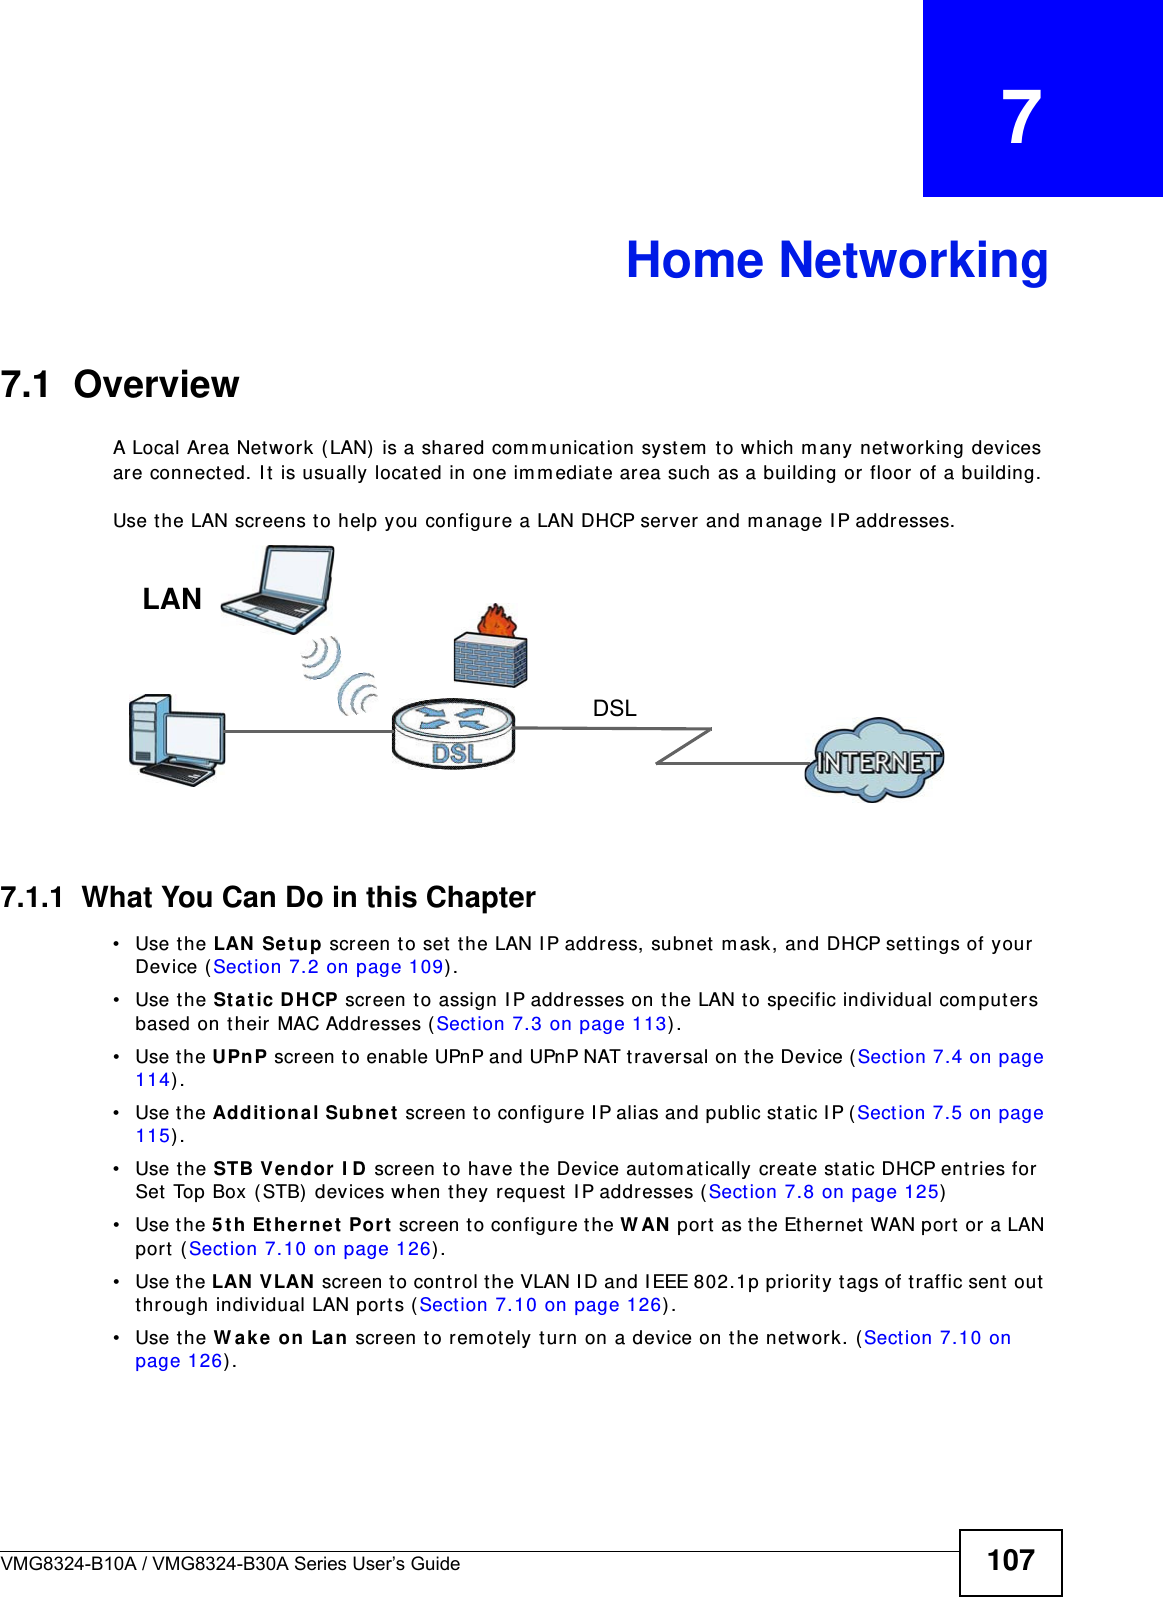 VMG8324-B10A / VMG8324-B30A Series User’s Guide 107CHAPTER   7Home Networking7.1  OverviewA Local Area Net work ( LAN) is a shared com m unication syst em  t o which m any net working devices are connect ed. I t is usually locat ed in one im m ediate area such as a building or floor of a building.Use t he LAN screens t o help you configure a LAN DHCP server and m anage I P addresses.7.1.1  What You Can Do in this Chapter• Use the LAN  Se t u p screen t o set t he LAN I P address, subnet  m ask, and DHCP set t ings of your Device ( Sect ion 7.2 on page 109) .• Use the Sta t ic DHCP screen to assign I P addresses on t he LAN t o specific individual com puters based on t heir MAC Addresses ( Sect ion 7.3 on page 113) . • Use the UPnP screen to enable UPnP and UPnP NAT t raversal on t he Device (Sect ion 7.4 on page 114) .• Use the Addit ional Subn e t  screen t o configure I P alias and public st at ic I P (Section 7.5 on page 115) .• Use the STB Ve n dor I D screen to have t he Device aut om at ically creat e st atic DHCP entries for Set Top Box ( STB)  devices when they request  I P addresses (Sect ion 7.8 on page 125)• Use the 5 t h Et hernet  Port  screen t o configure t he W AN  port as t he Ethernet  WAN port  or a LAN port  ( Section 7.10 on page 126) .• Use the LAN  VLAN  screen to cont r ol t he VLAN I D and I EEE 802.1p priorit y t ags of t raffic sent  out  through individual LAN port s ( Section 7.10 on page 126) .• Use the W ak e on La n  screen t o r em ot ely t urn on a device on t he net work. ( Sect ion 7.10 on page 126) .DSLLAN